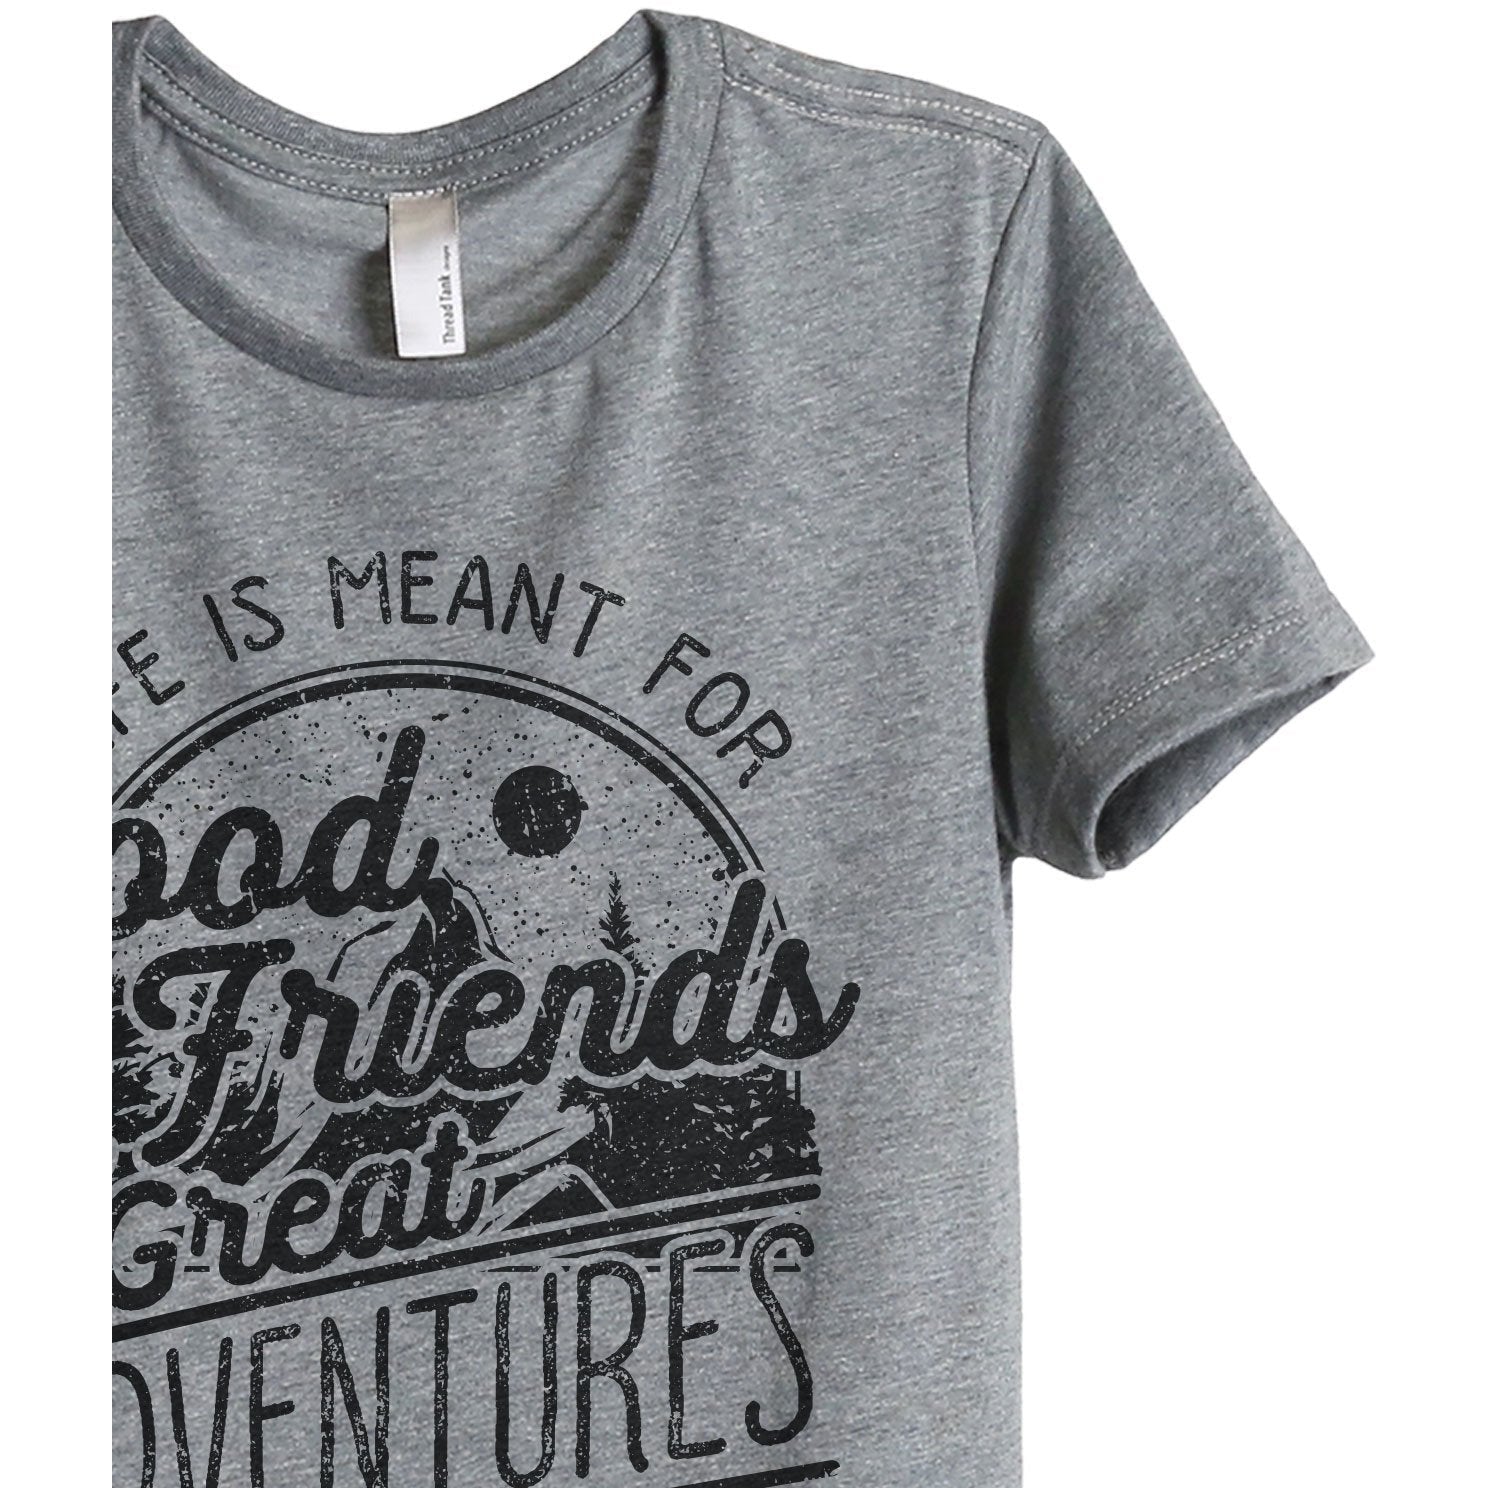 Good Friends And Great Adventures Women's Relaxed Crewneck T-Shirt Top Tee Heather Grey Zoom Details
